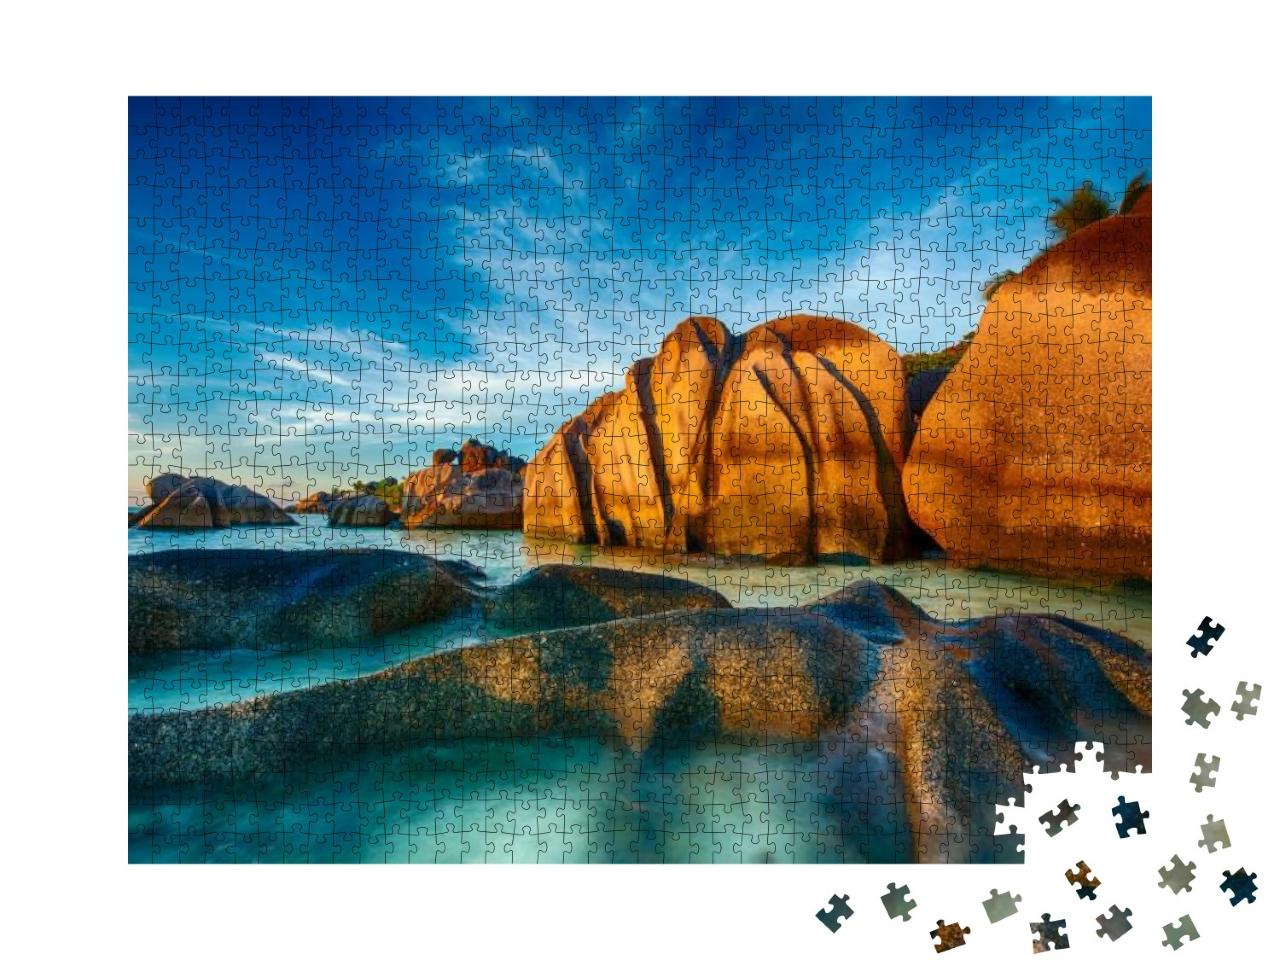 Beautifully Shaped Granite Boulders & a Dramatic Sunset A... Jigsaw Puzzle with 1000 pieces